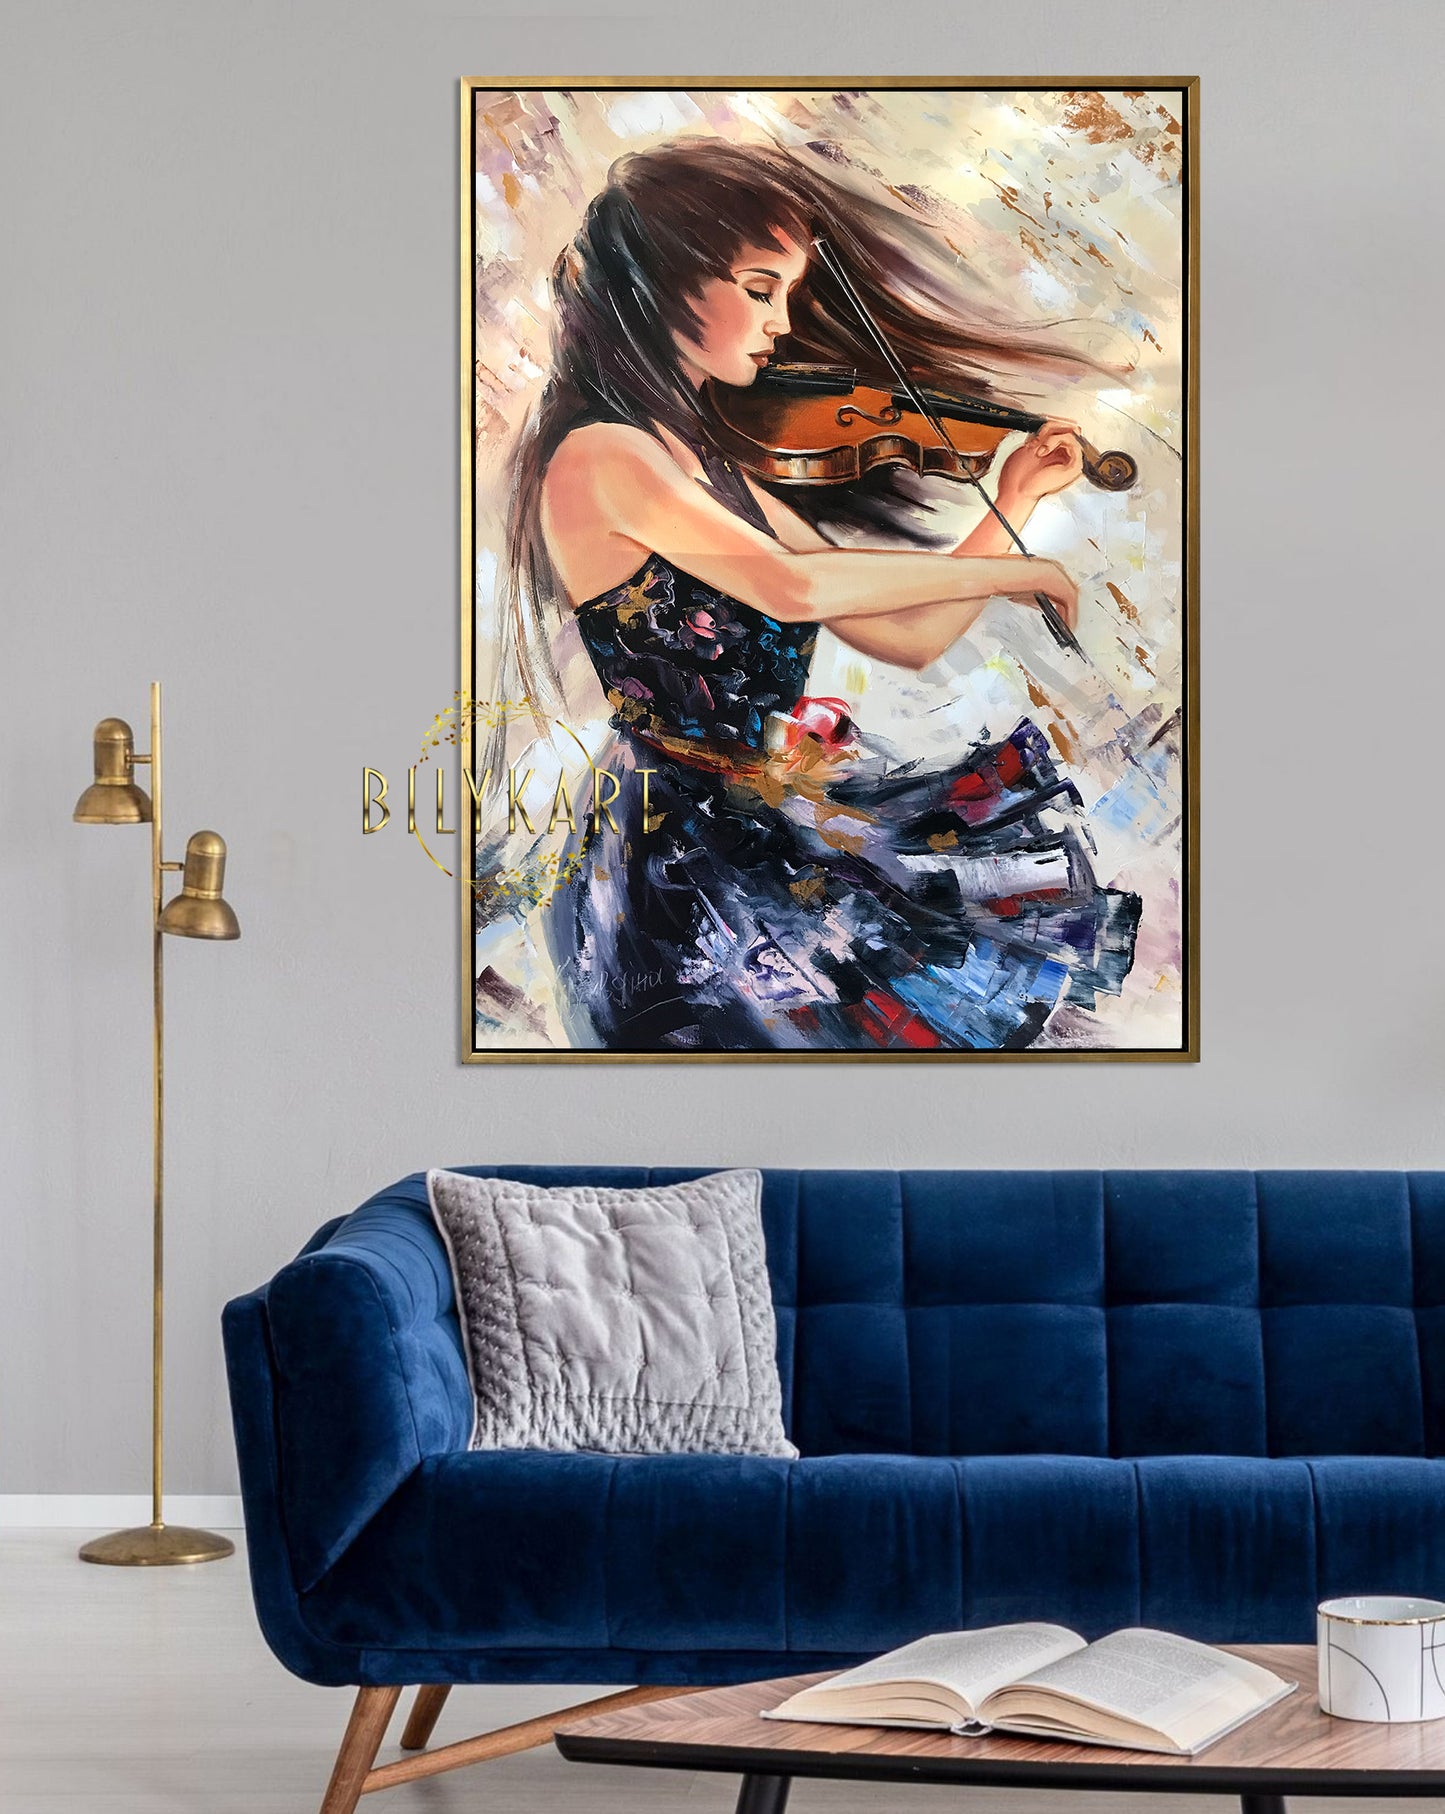 Large Oil Painting Woman Playing Violin Painting on Canvas Violin Wall Art Blue Gray Abstract Musician Painting Original Music Art Gift 